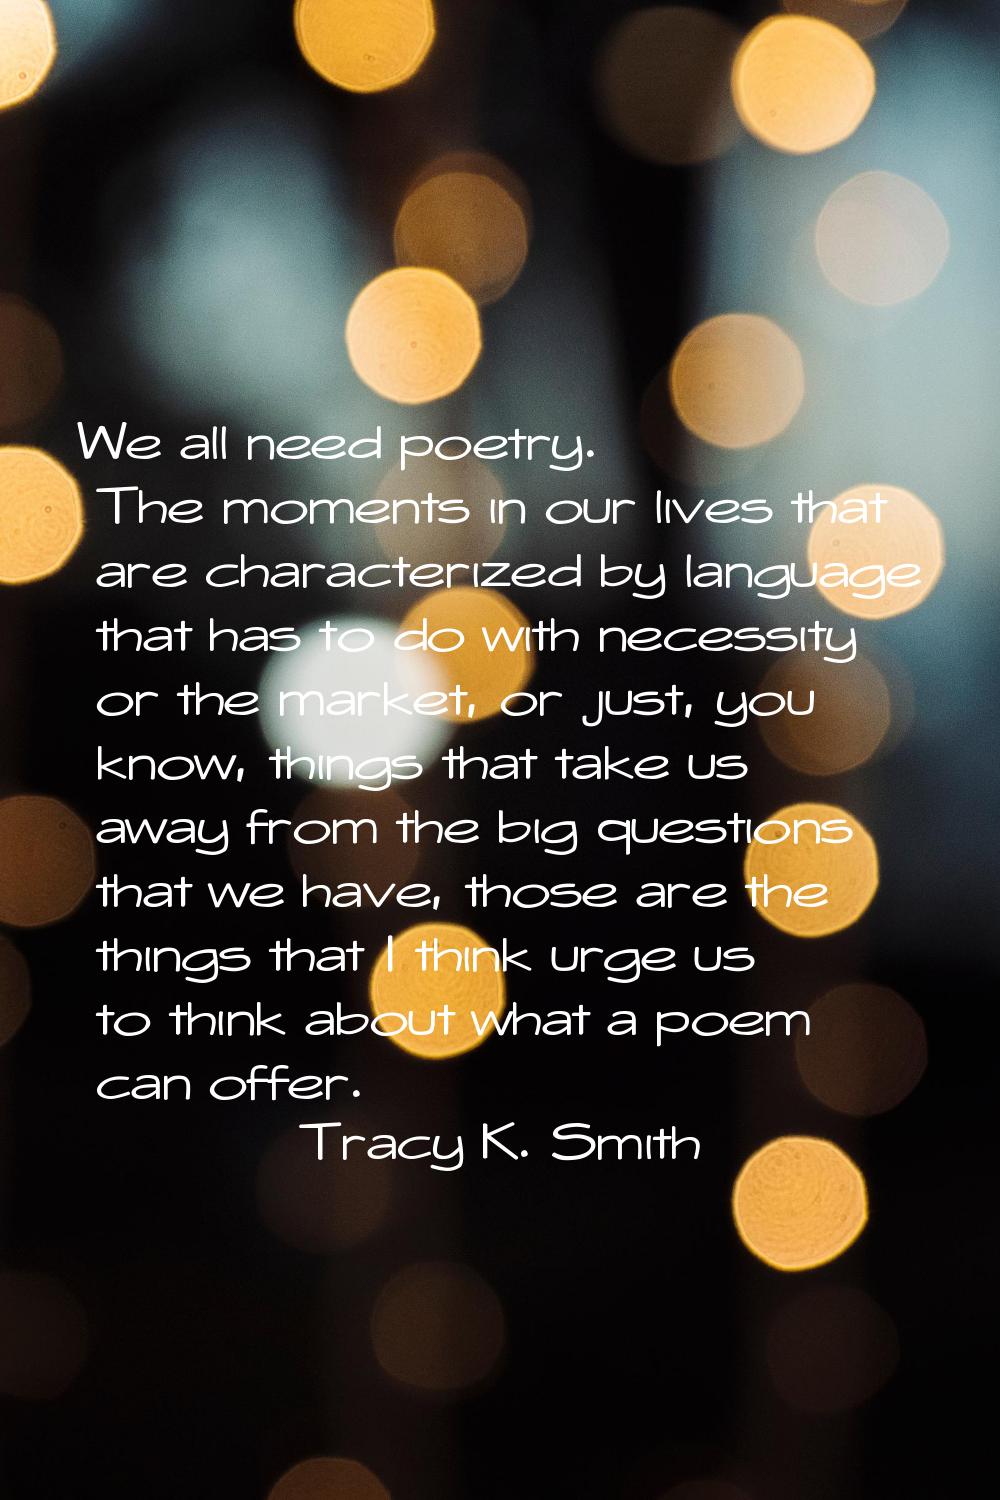 We all need poetry. The moments in our lives that are characterized by language that has to do with